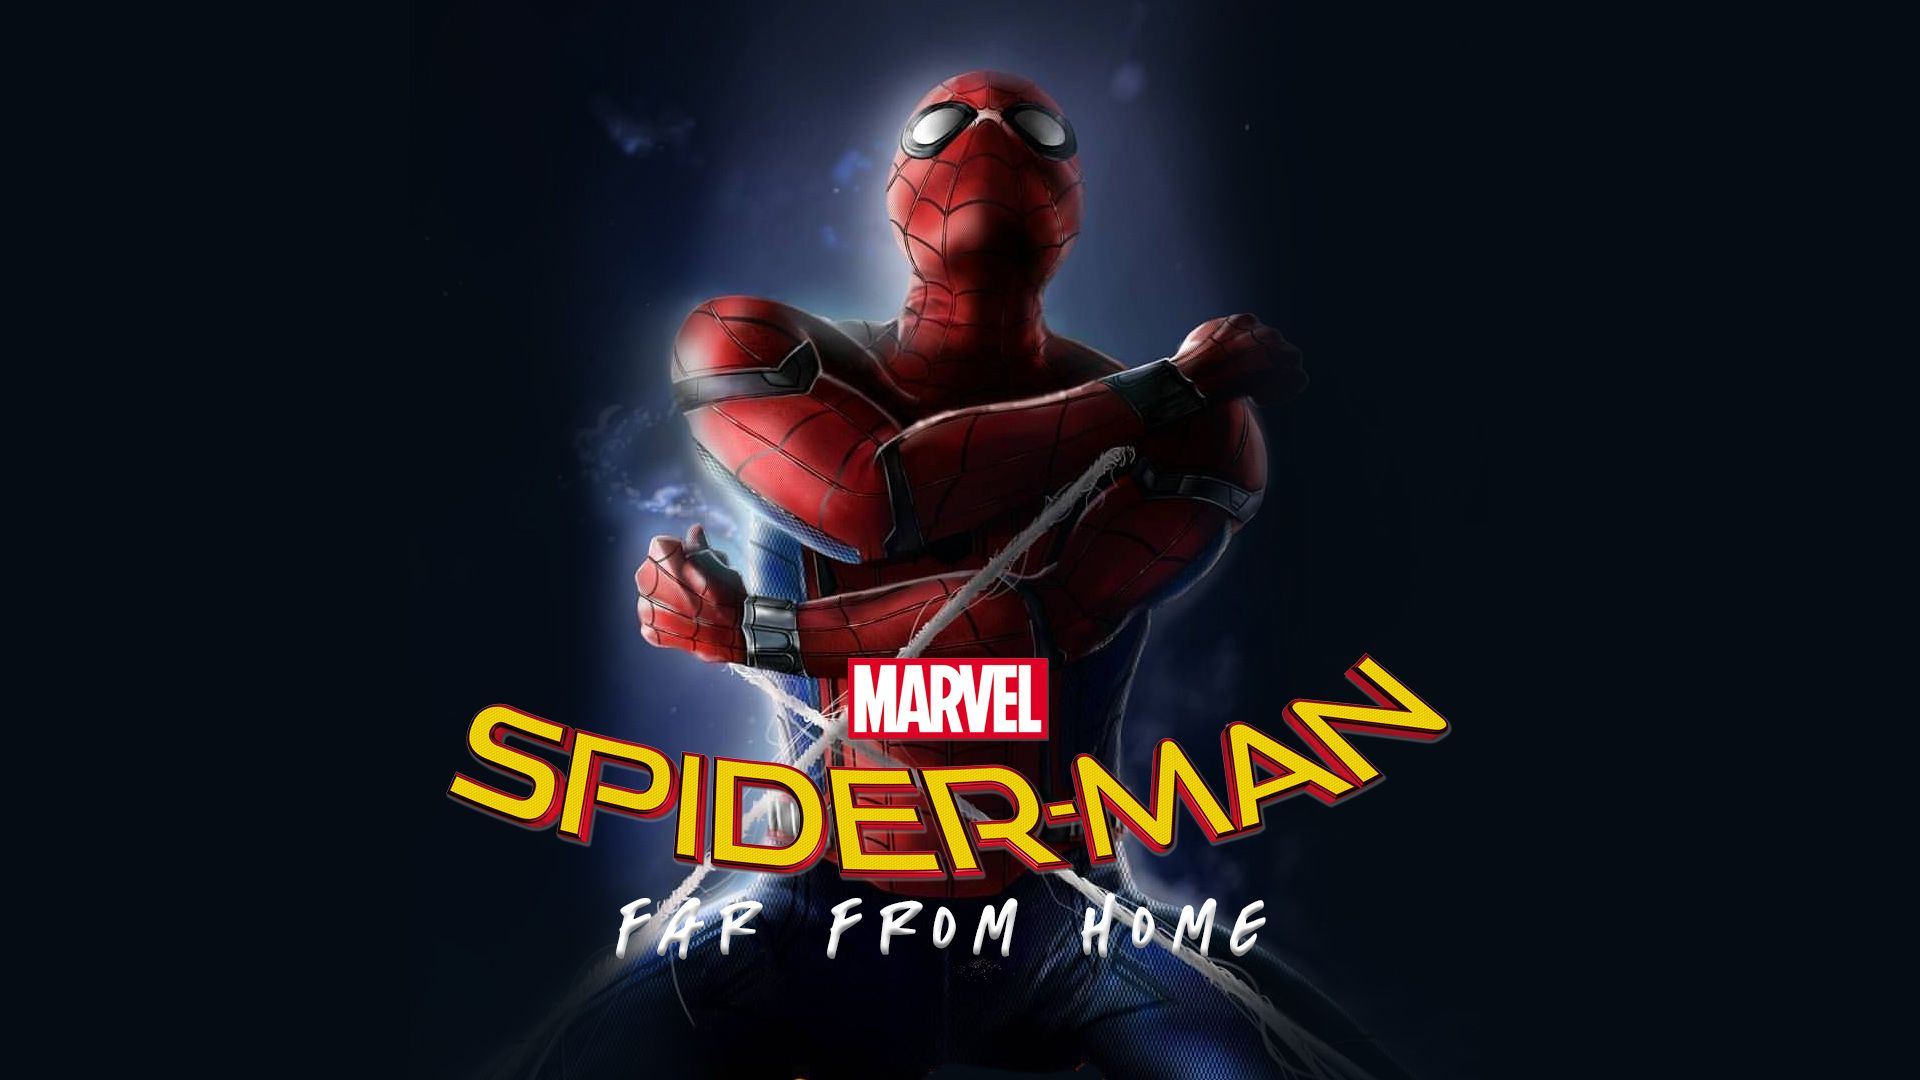 SpiderMan Far From Home Wallpaper 4K Red Movies 884